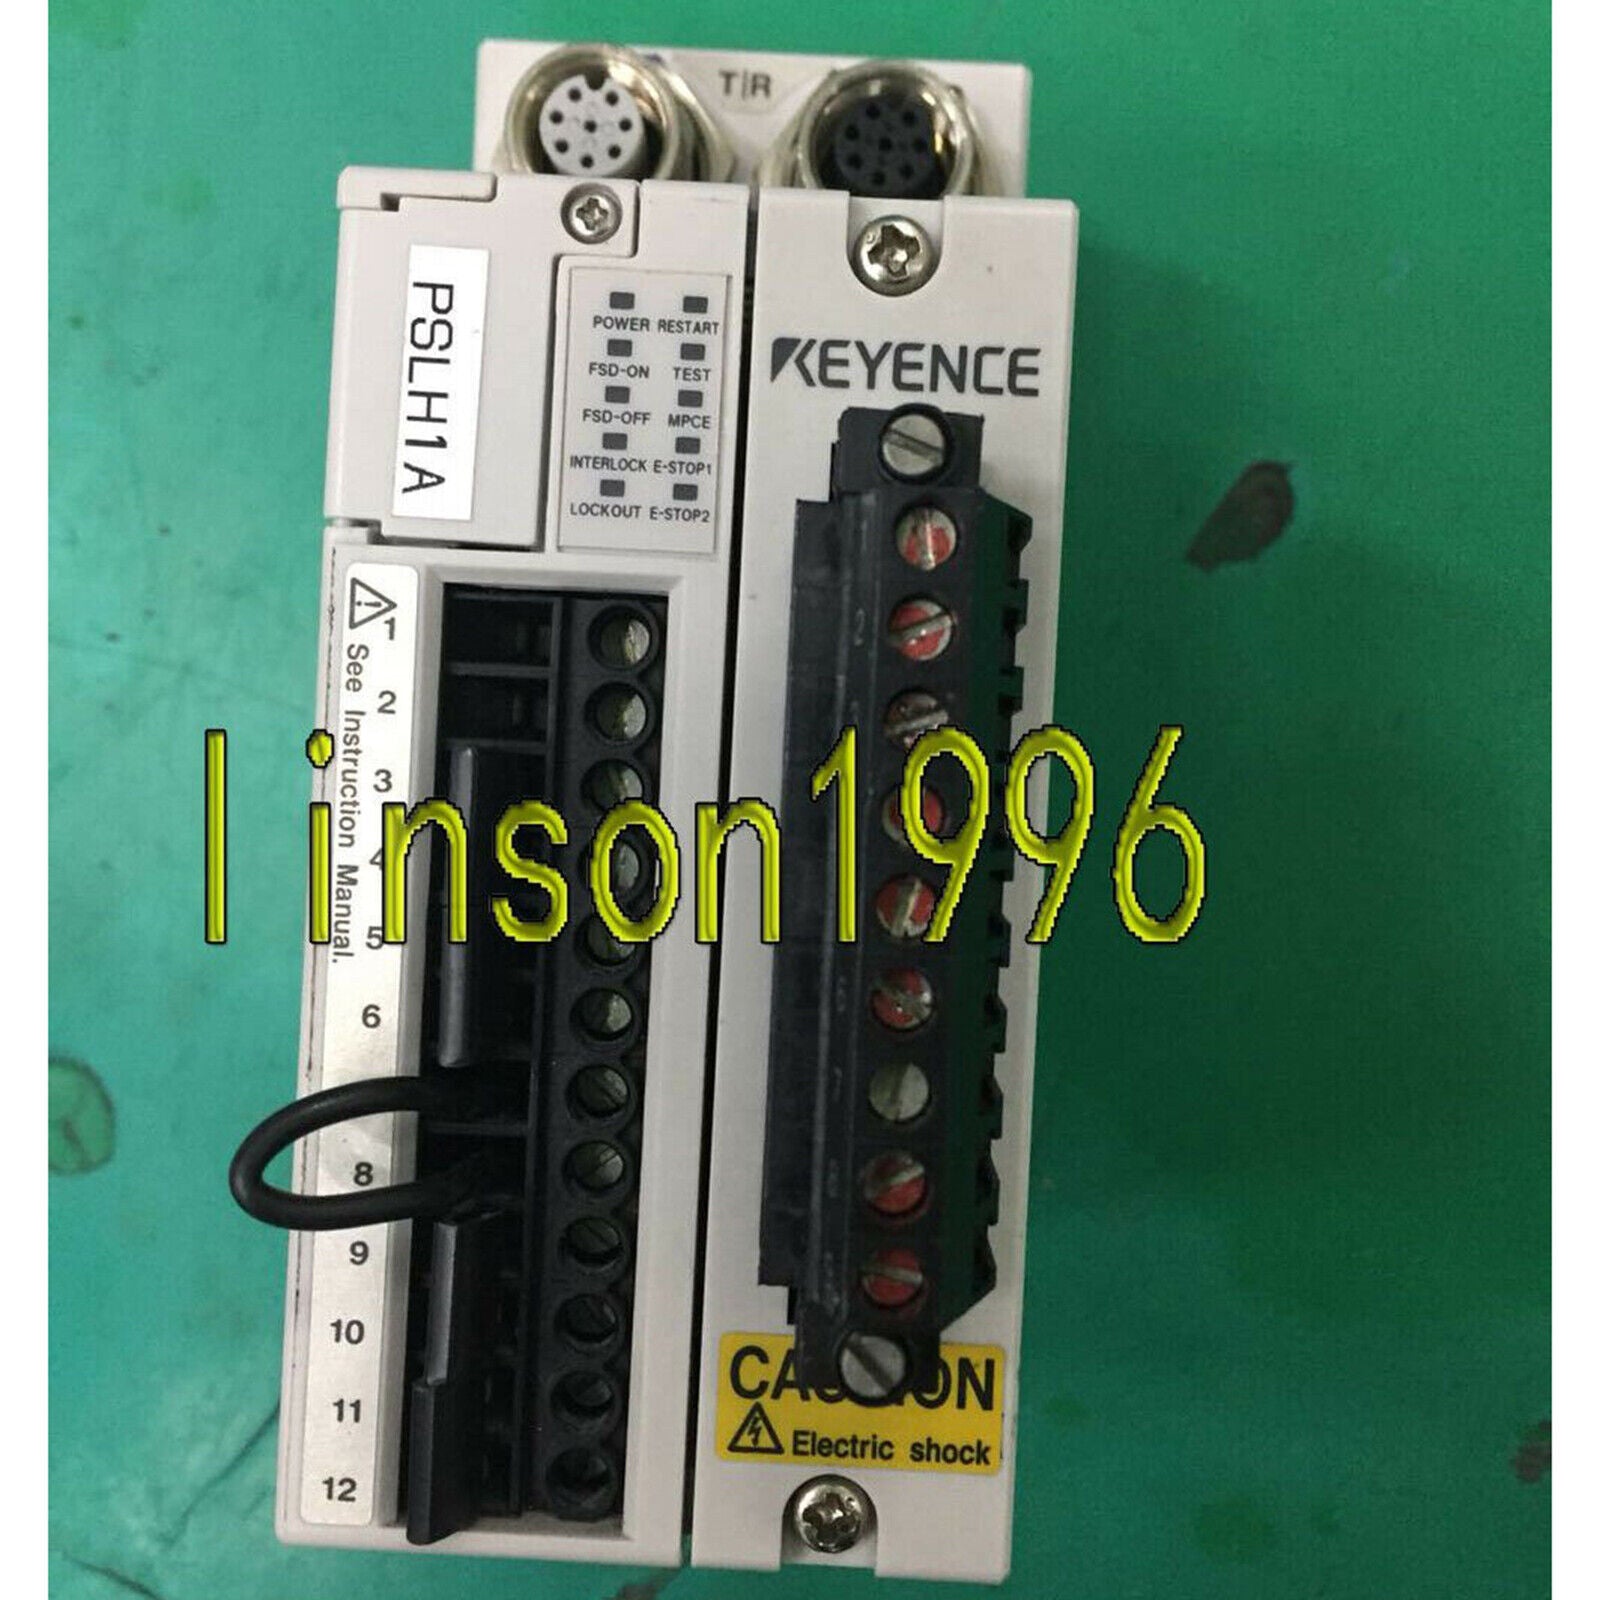 used ONE  for Keyence SL-R11G Safety grating controller